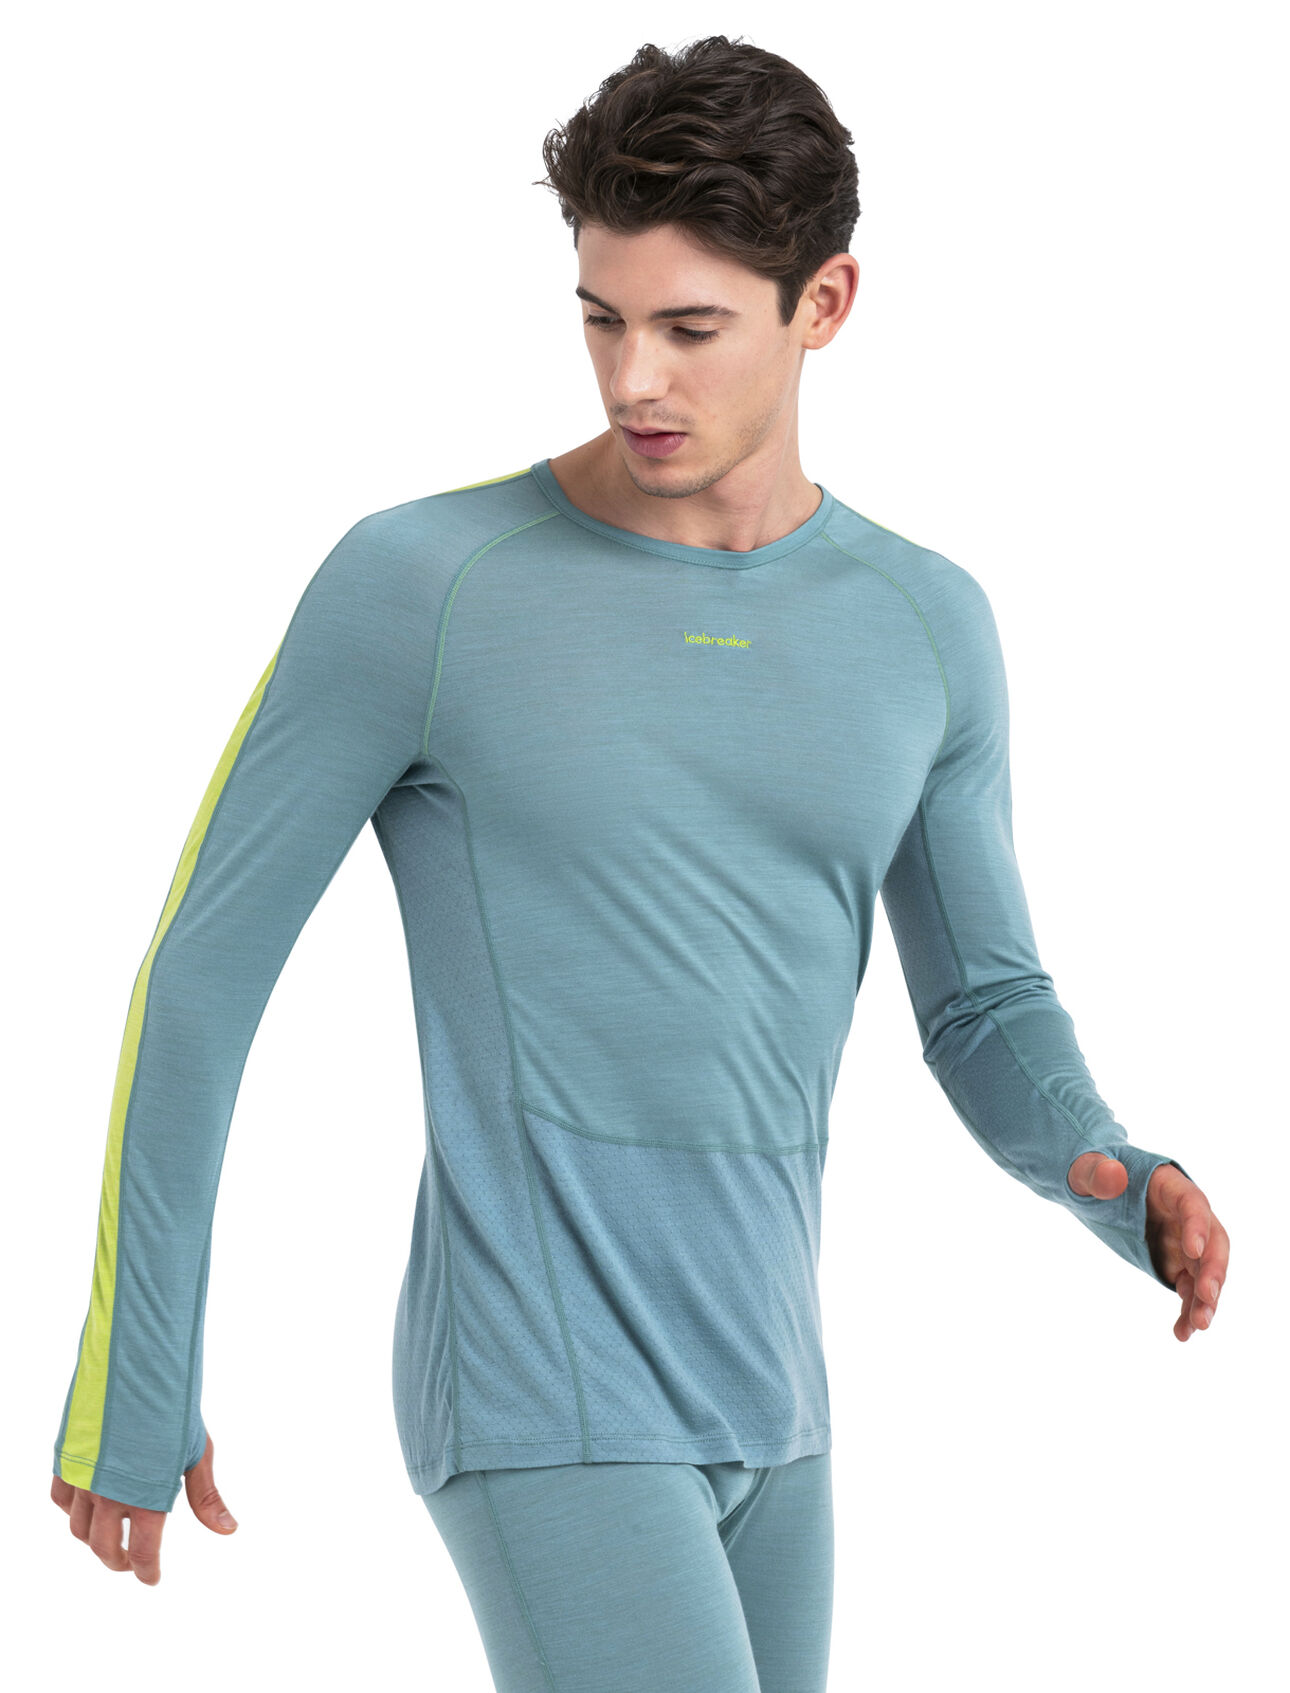 Mens 125 ZoneKnit™ Merino Blend Long Sleeve Crewe Thermal Top An ultralight merino base layer top designed to help regulate body temperature during high-intensity activity, the 125 ZoneKnit™ Long Sleeve Crewe features our jersey Cool-Lite™ fabric for adventure and everyday training.